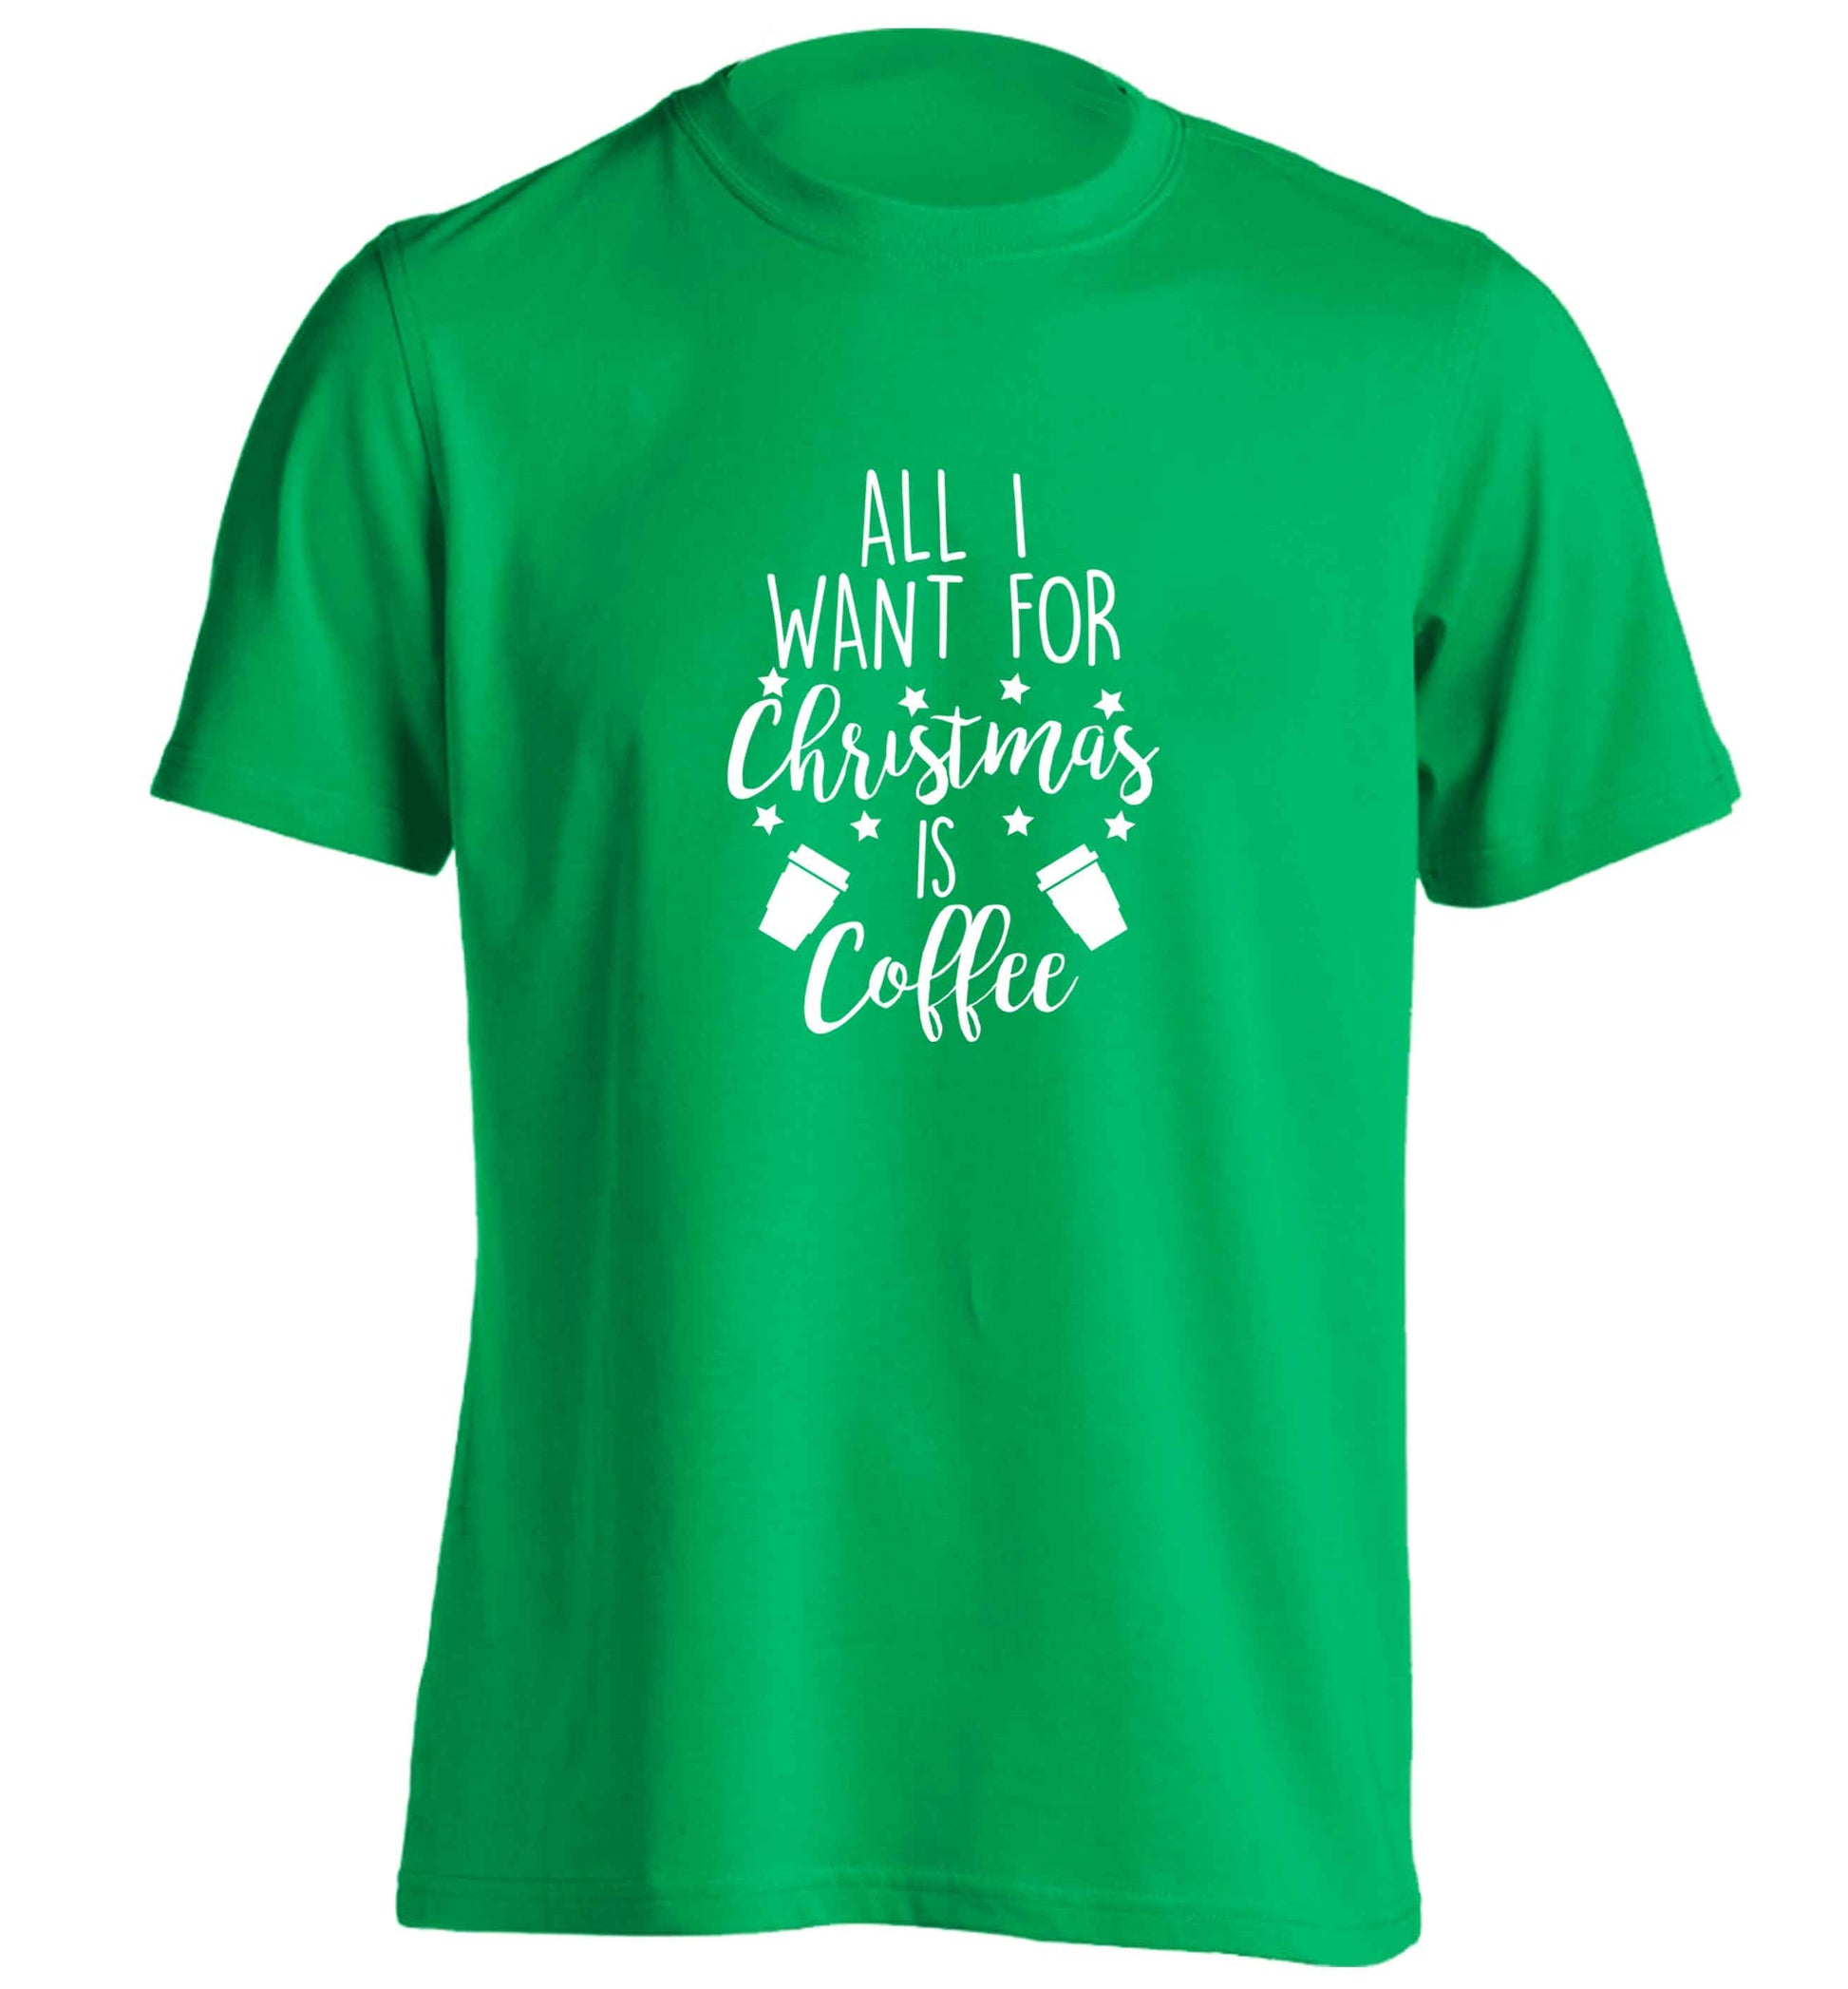 All I want for Christmas is coffee adults unisex green Tshirt 2XL